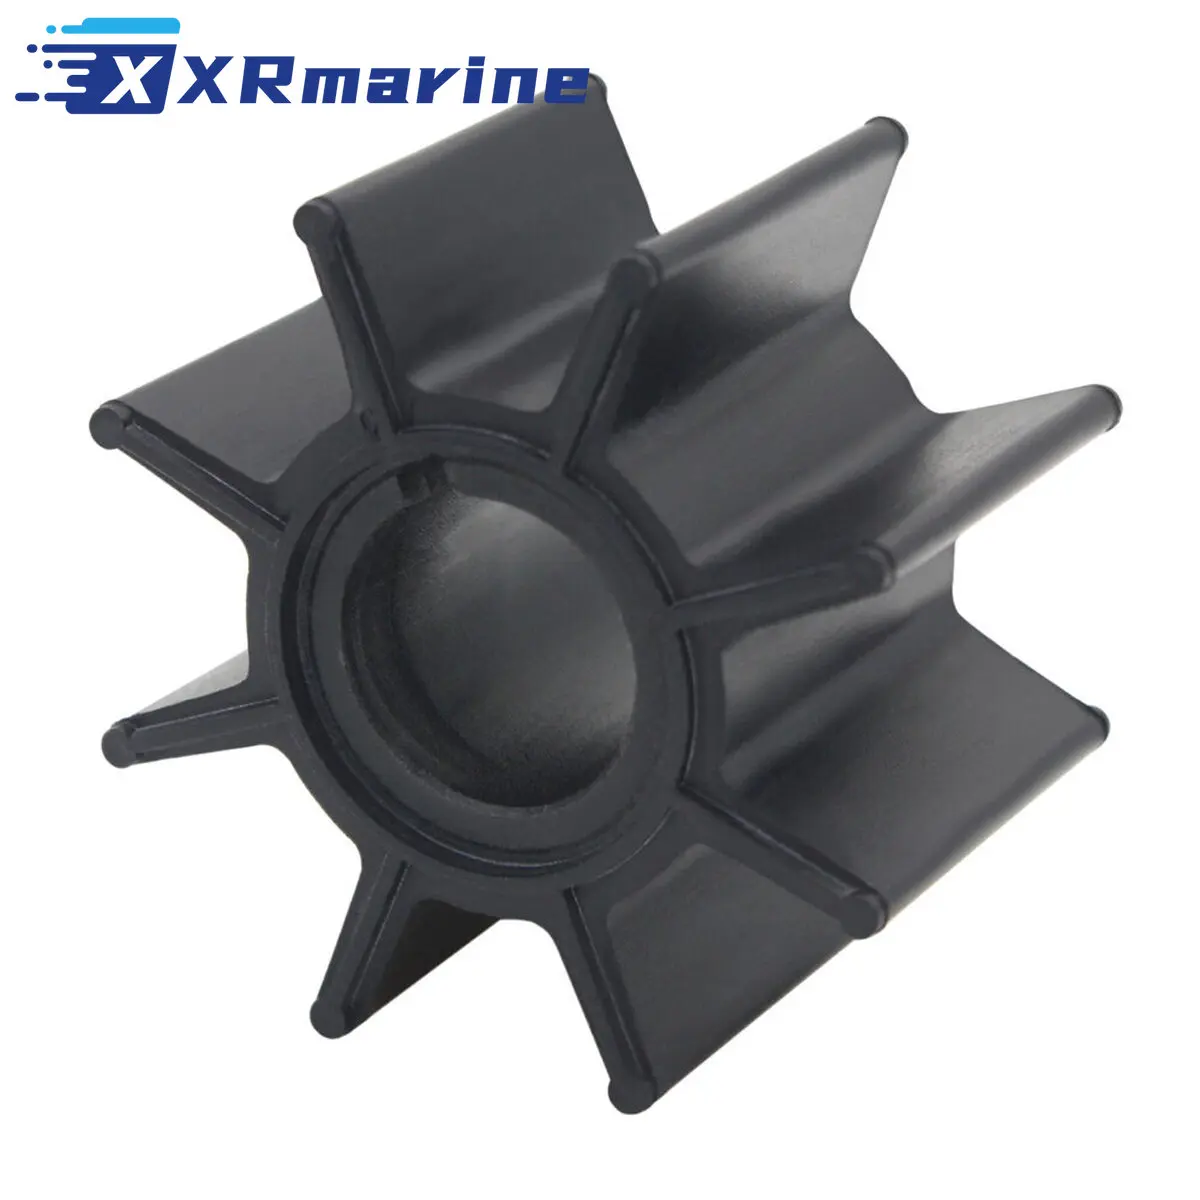 334-65021-0 Water Pump Impeller 334-65021-0M for Tohatsu Outboard Motor 334650210 9.9 15 18 20 HP 334650210M 334 65021 0 water pump impeller 334 65021 0m for tohatsu outboard motor 334650210 9 9 15 18 20 hp 334650210m